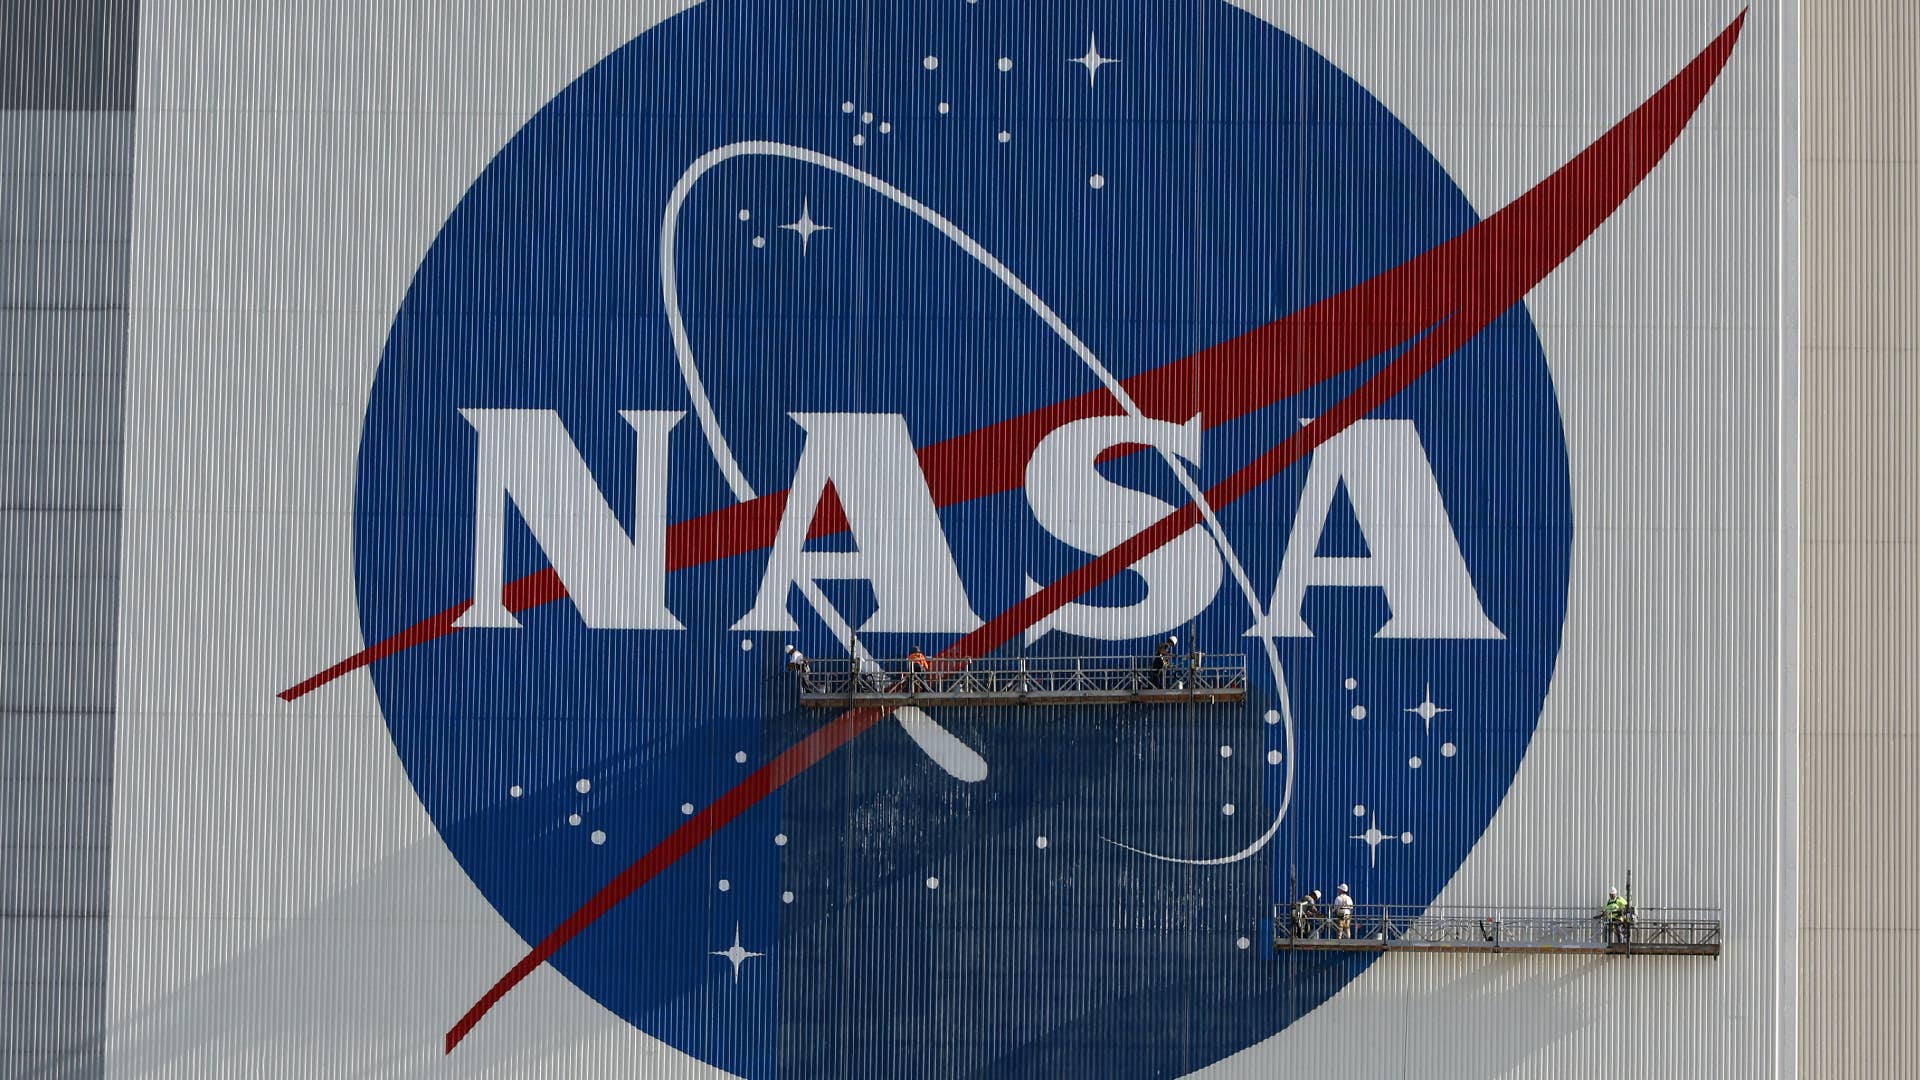 A logo for the NASA agency is shown.